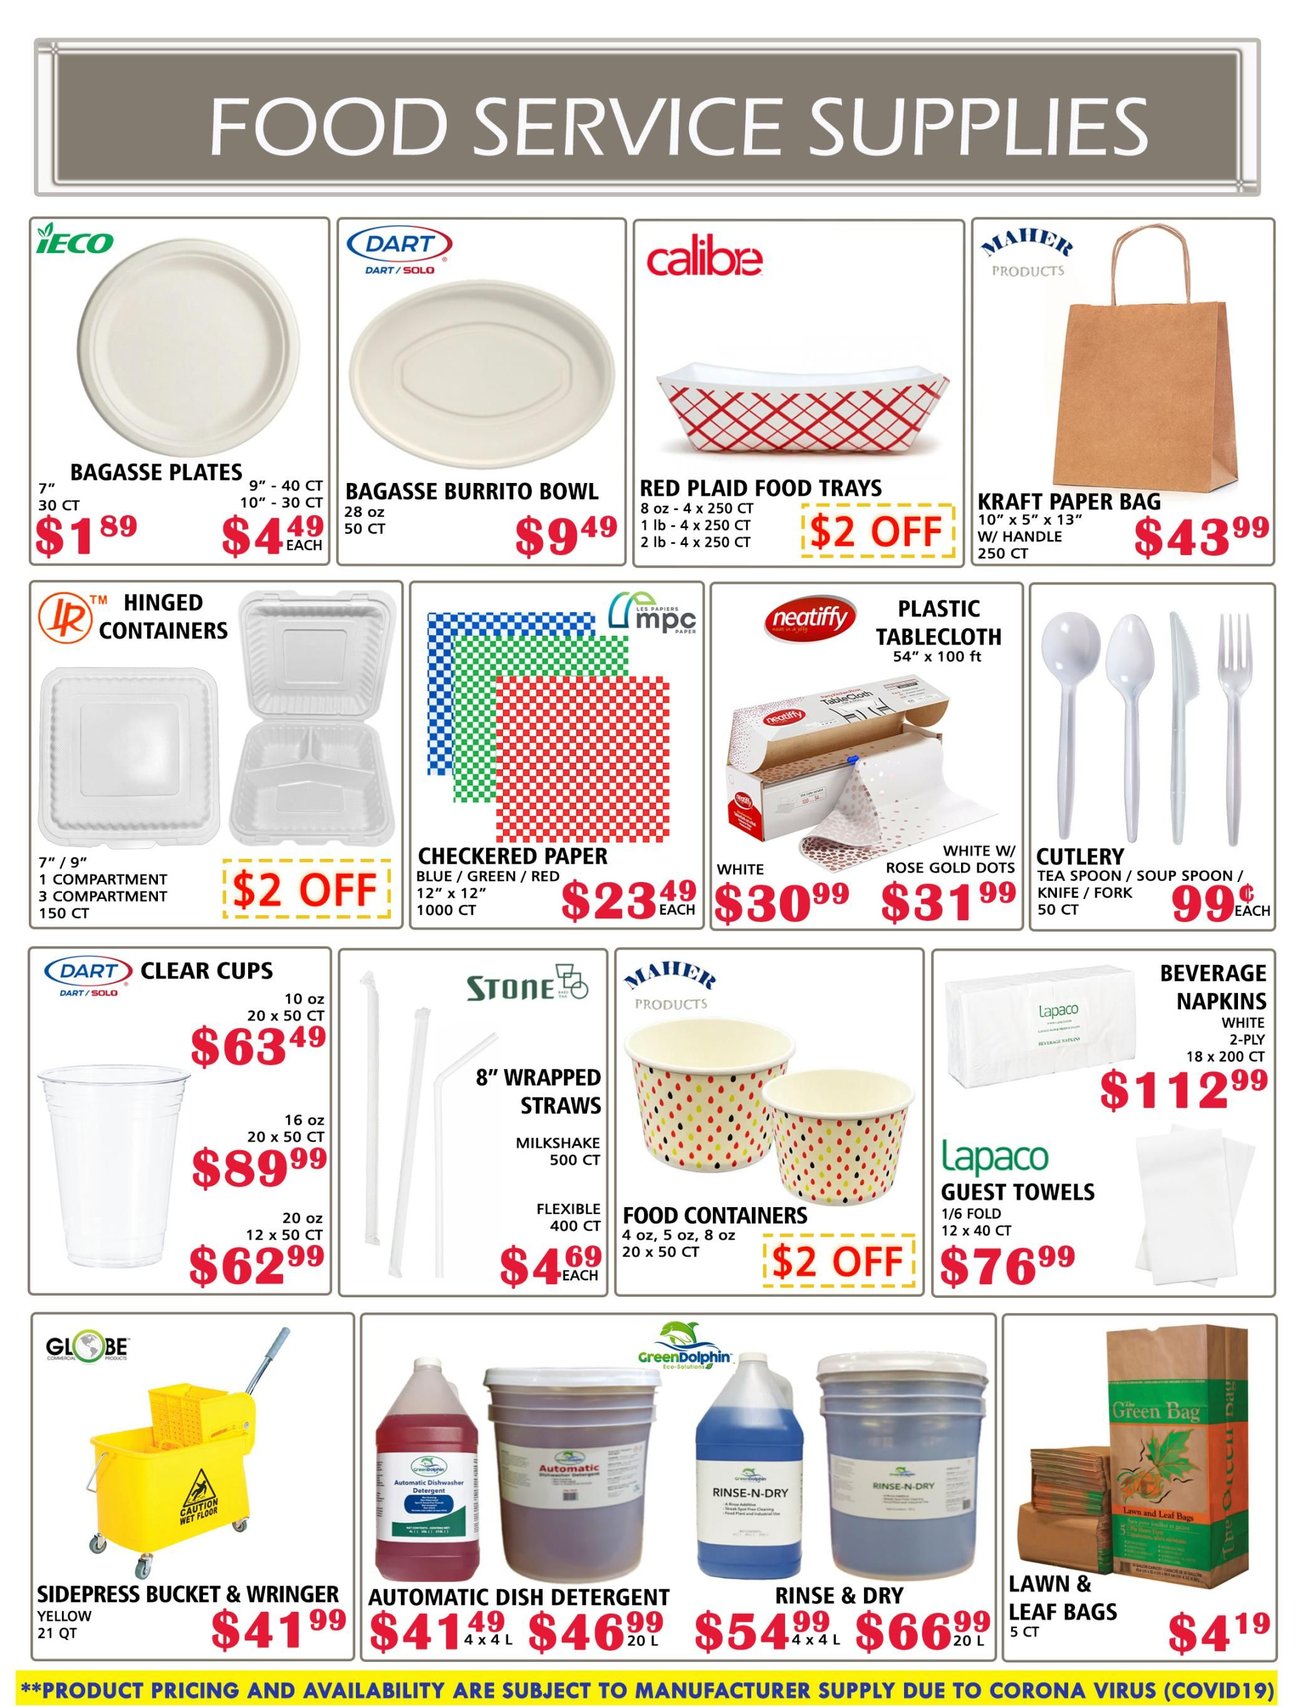 MVR Cash and Carry - Monthly Specials - Page 6